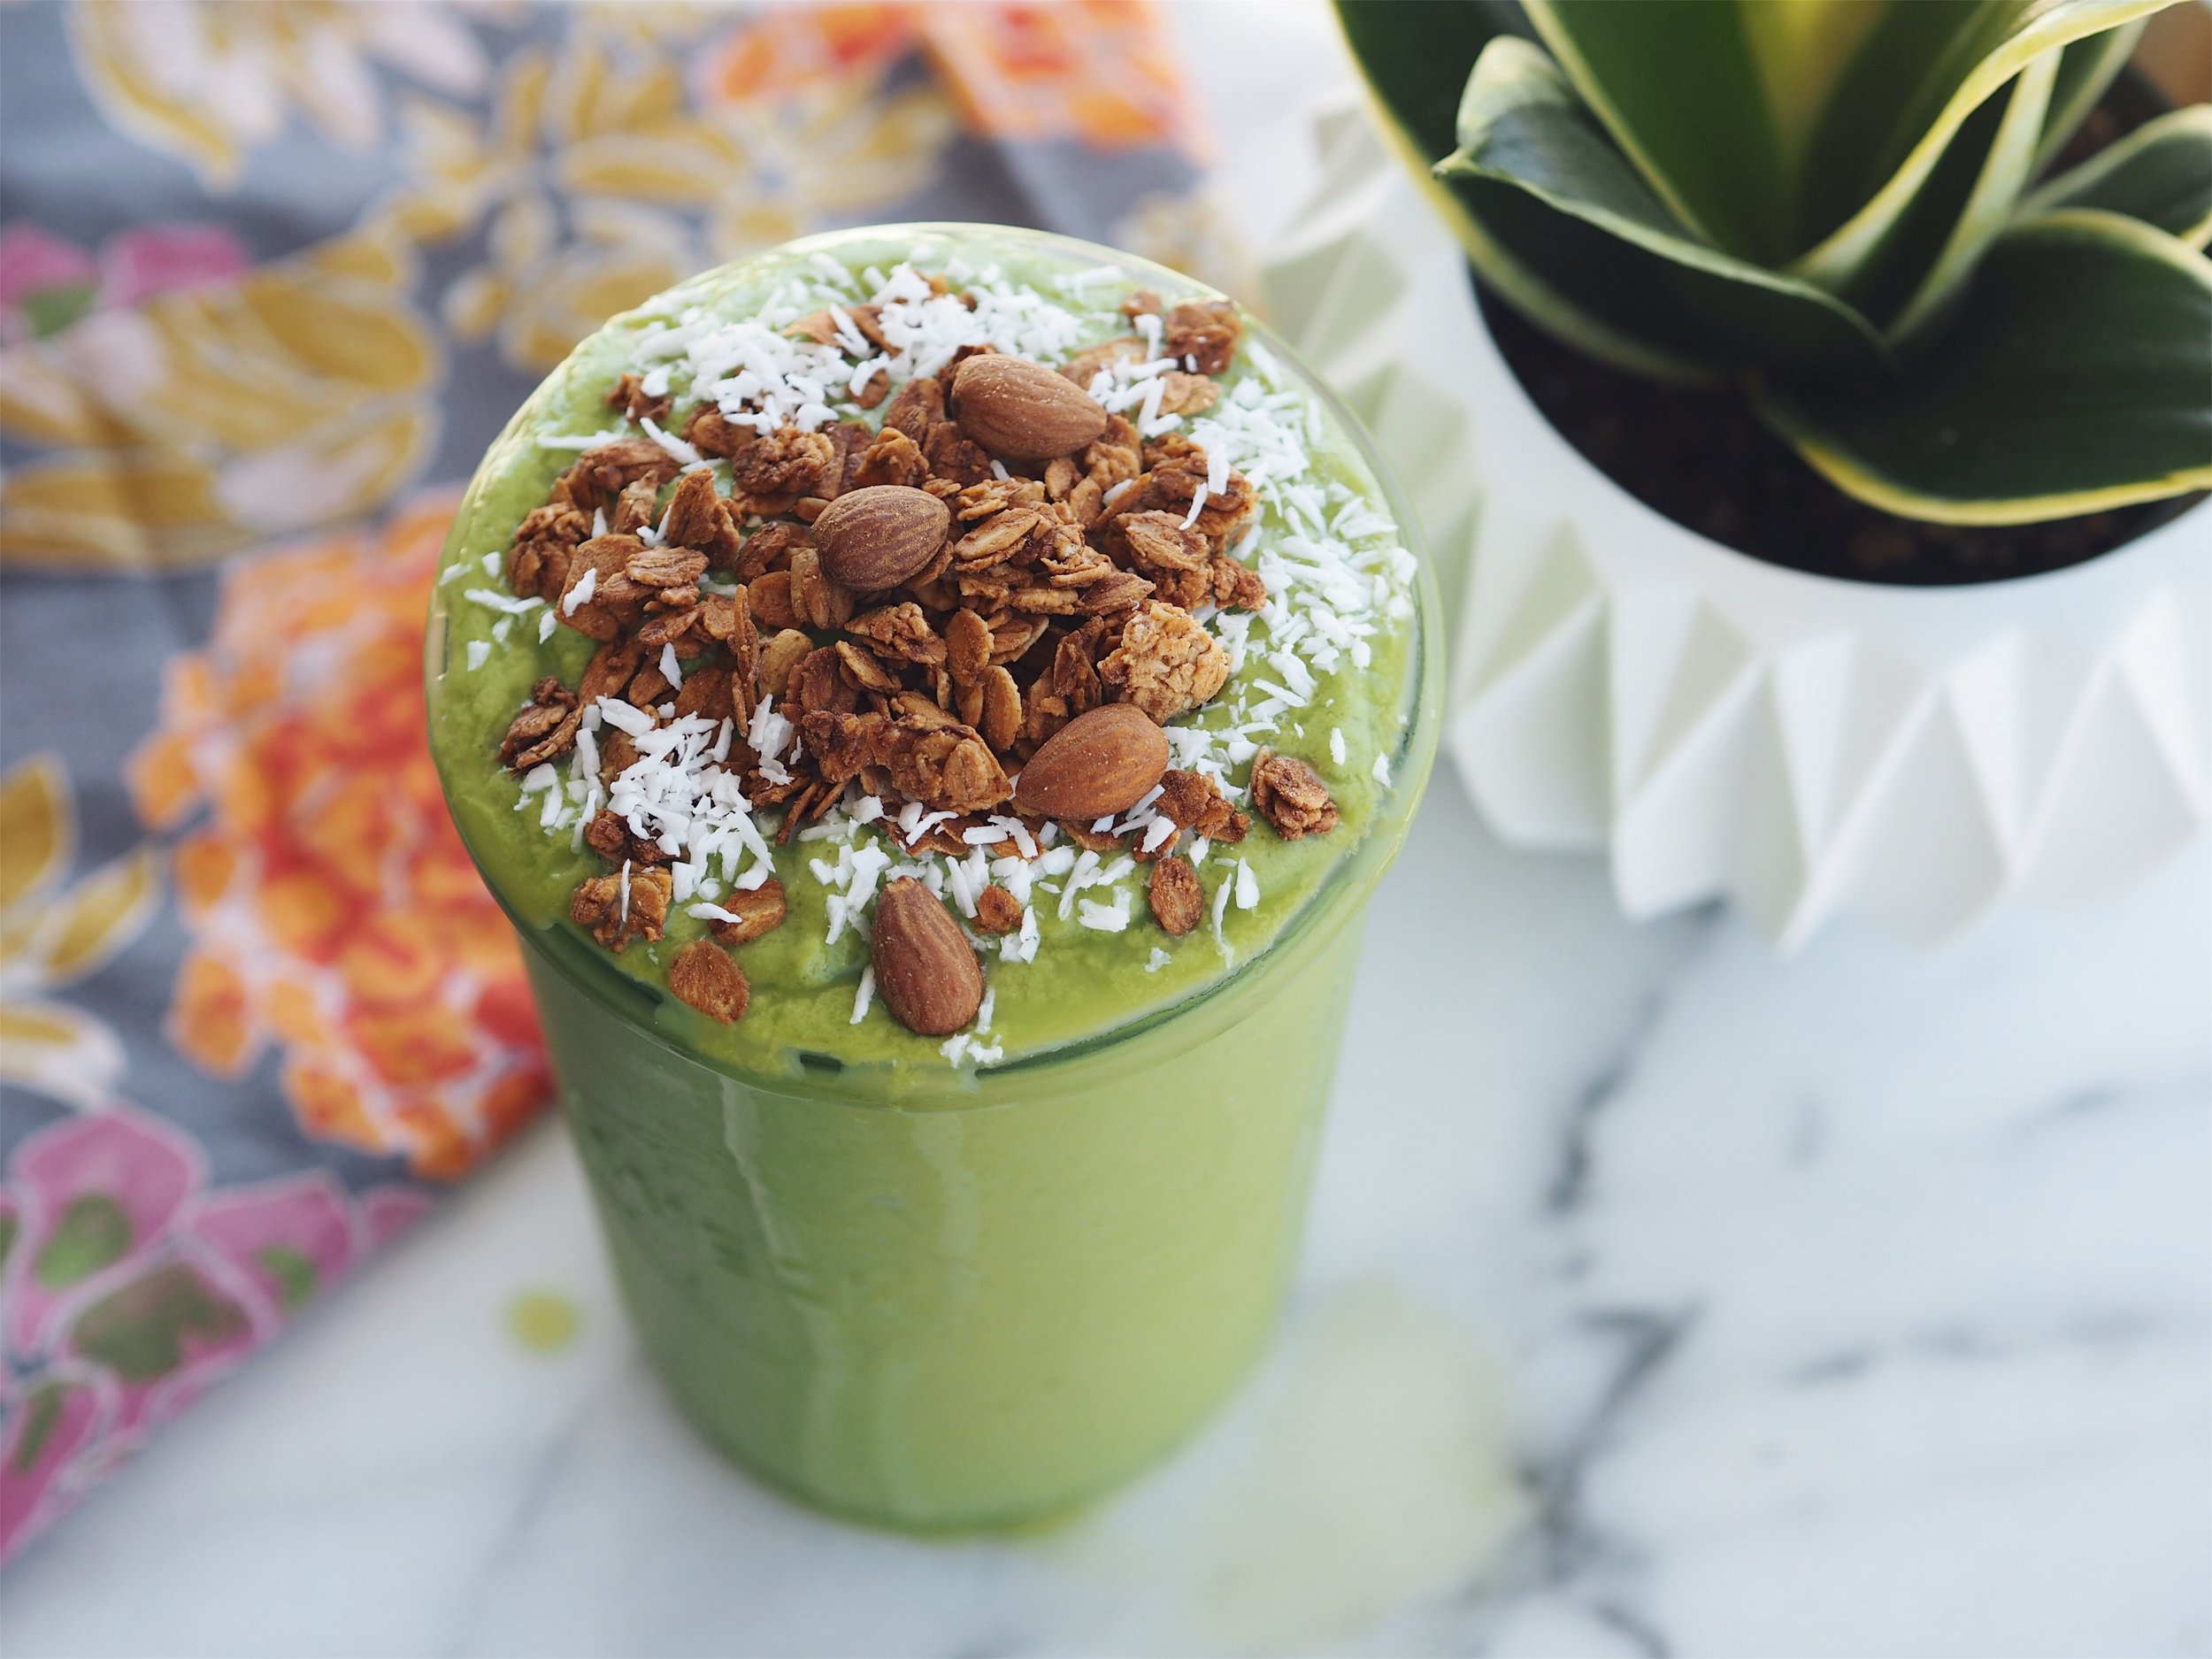 my go-to green smoothie